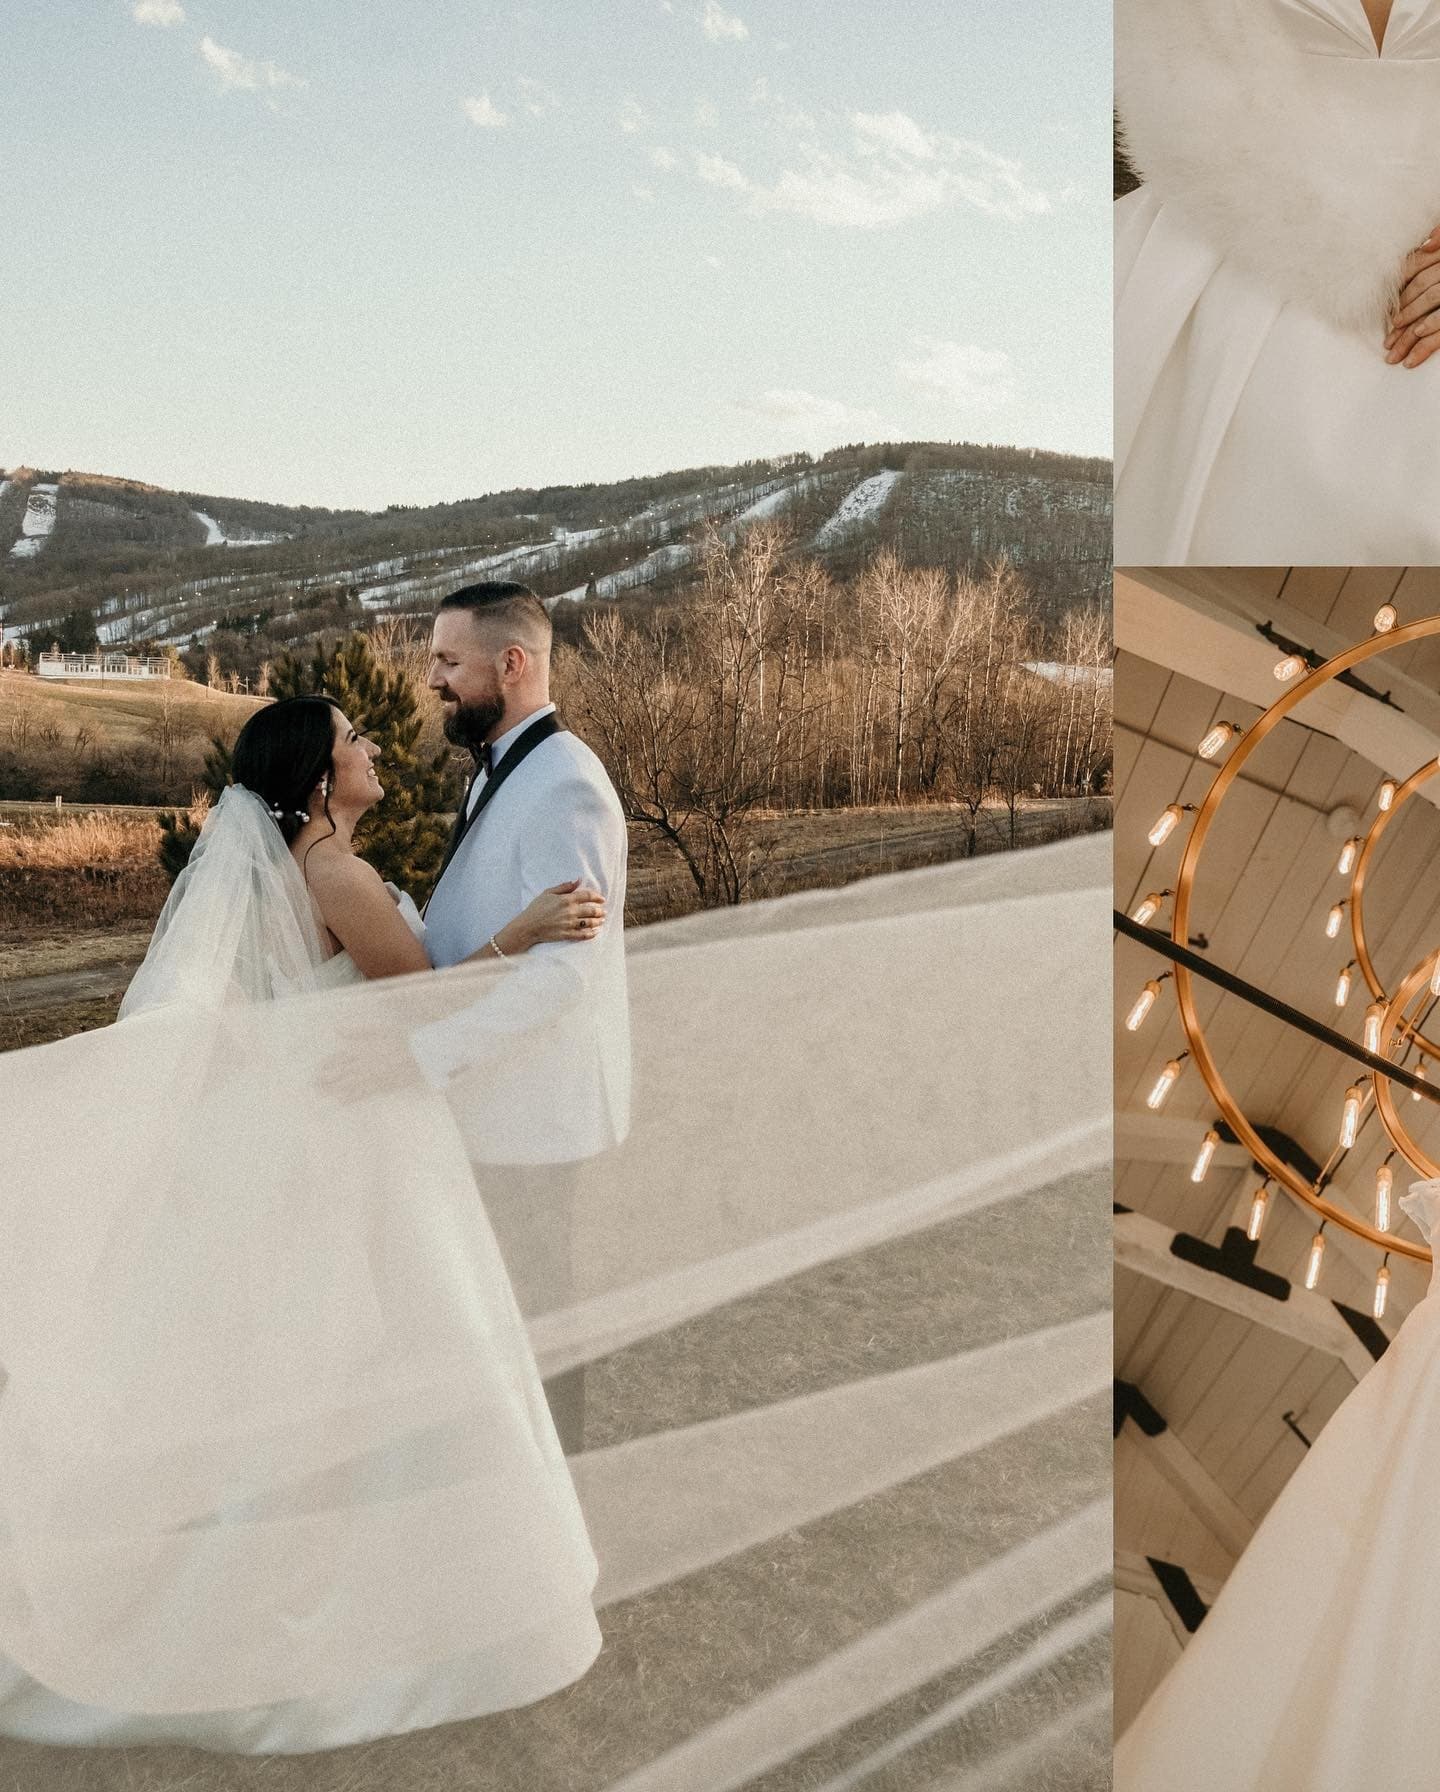 The Art of Moody Wedding Photography: A Blend of Vintage and Modern Techniques